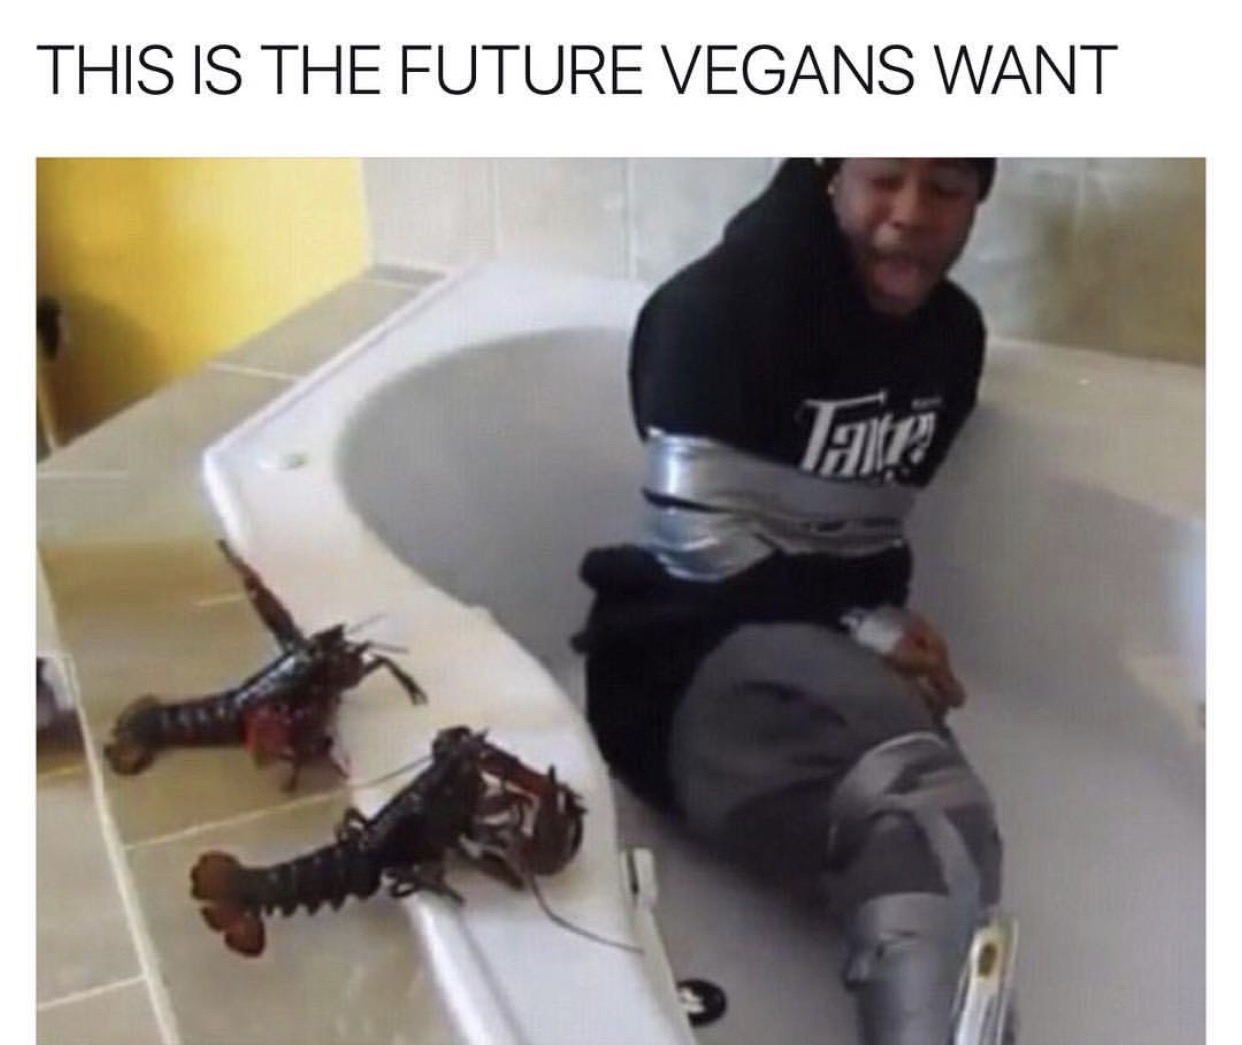 Man in a tub tied up with duct tape and threatened by lobsters, this is the future vegans want